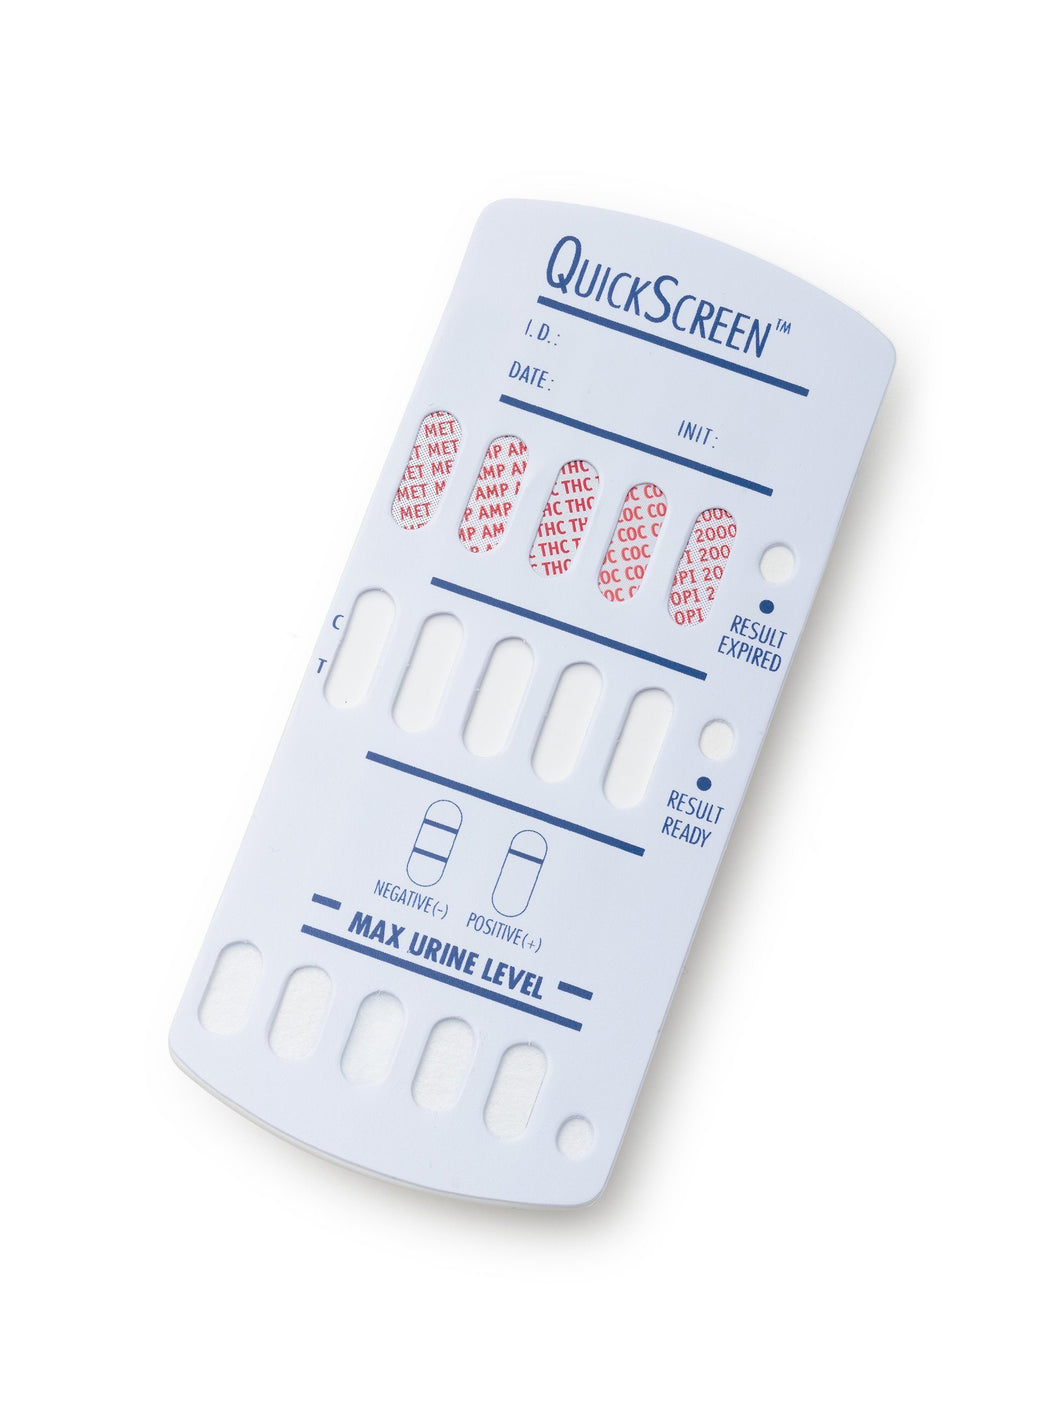 (25 Pack) 5 Panel QuickScreen Dipcard - 9178T - AMP, COC, MET-500, OPI-2000, THC + Timer-Countrywide Testing